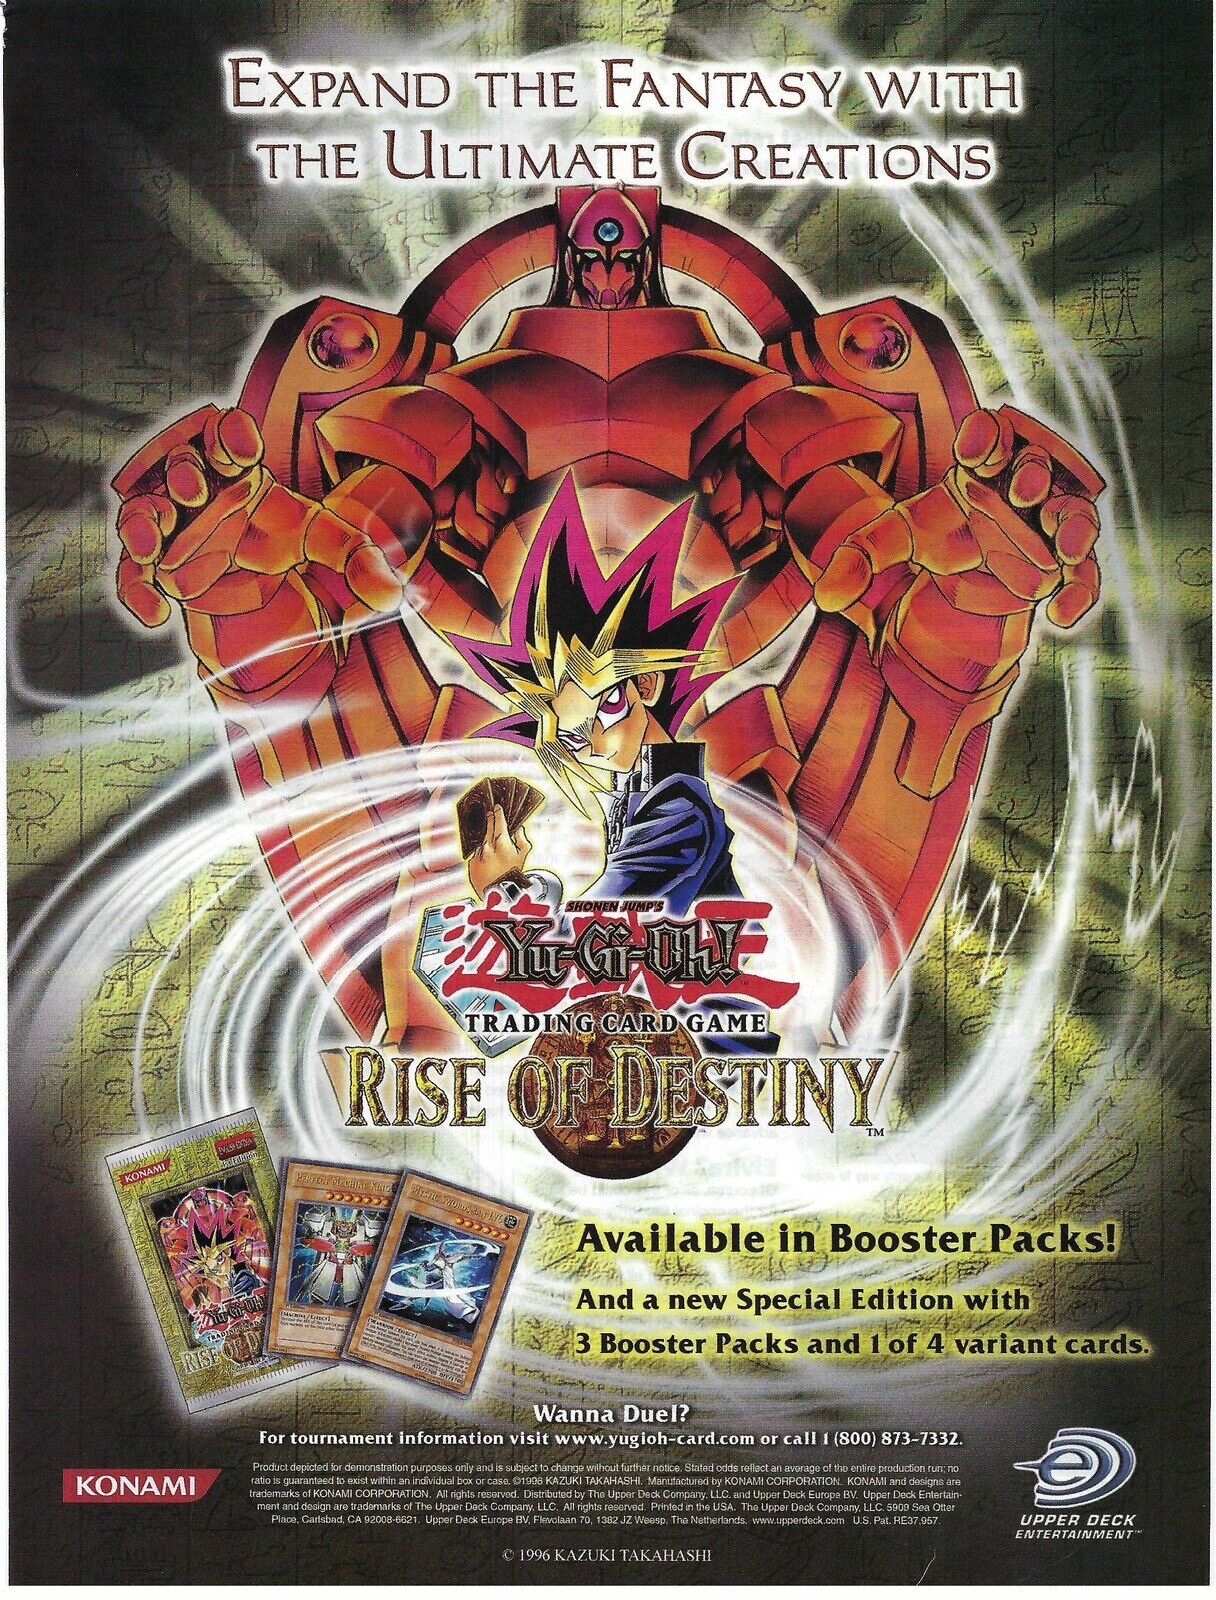 2004 Yu-Gi-Oh Rise Of Destiny Booster Pack Trading Cards Retro Print Ad/Poster